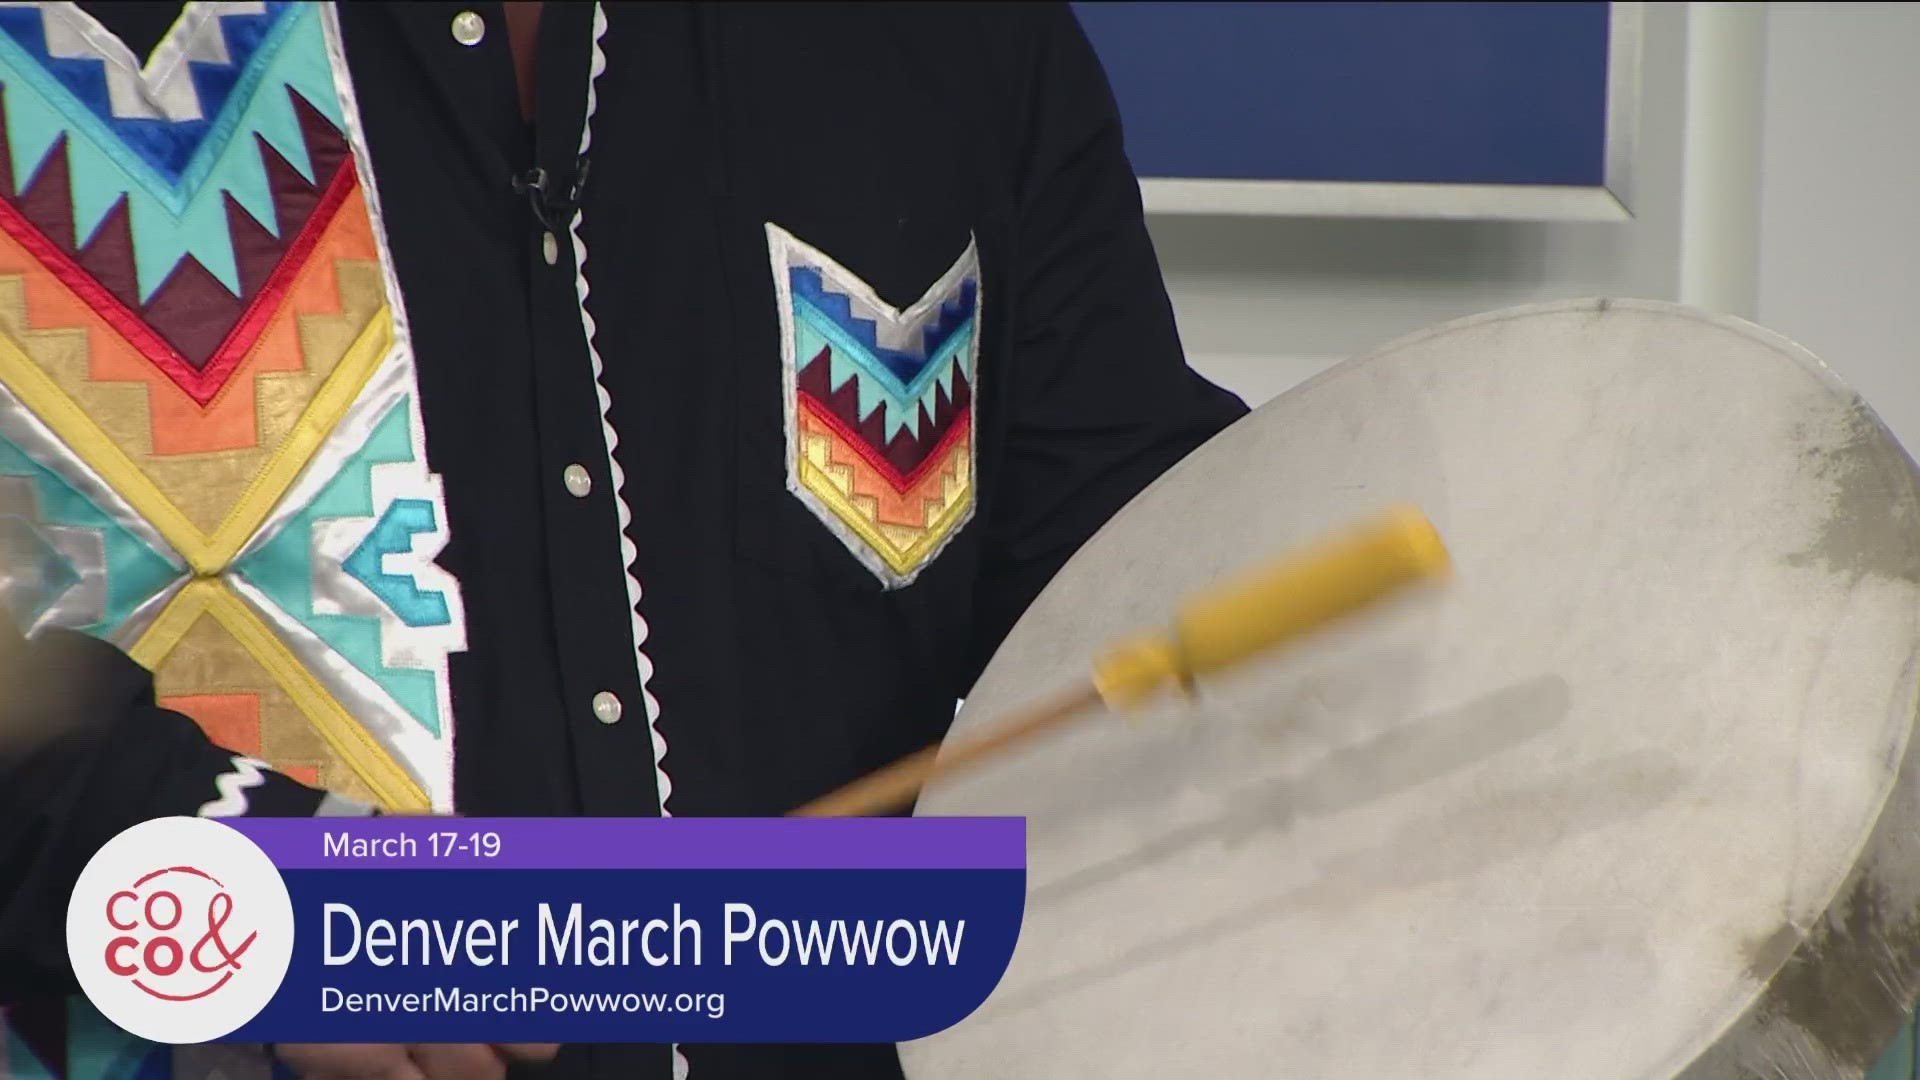 The Denver March Powwow kicks off on Friday, Mar. 17 and runs through Sunday, Mar. 19 at the Denver Coliseum.
Get your tickets now at DenverMarchPowwow.org.